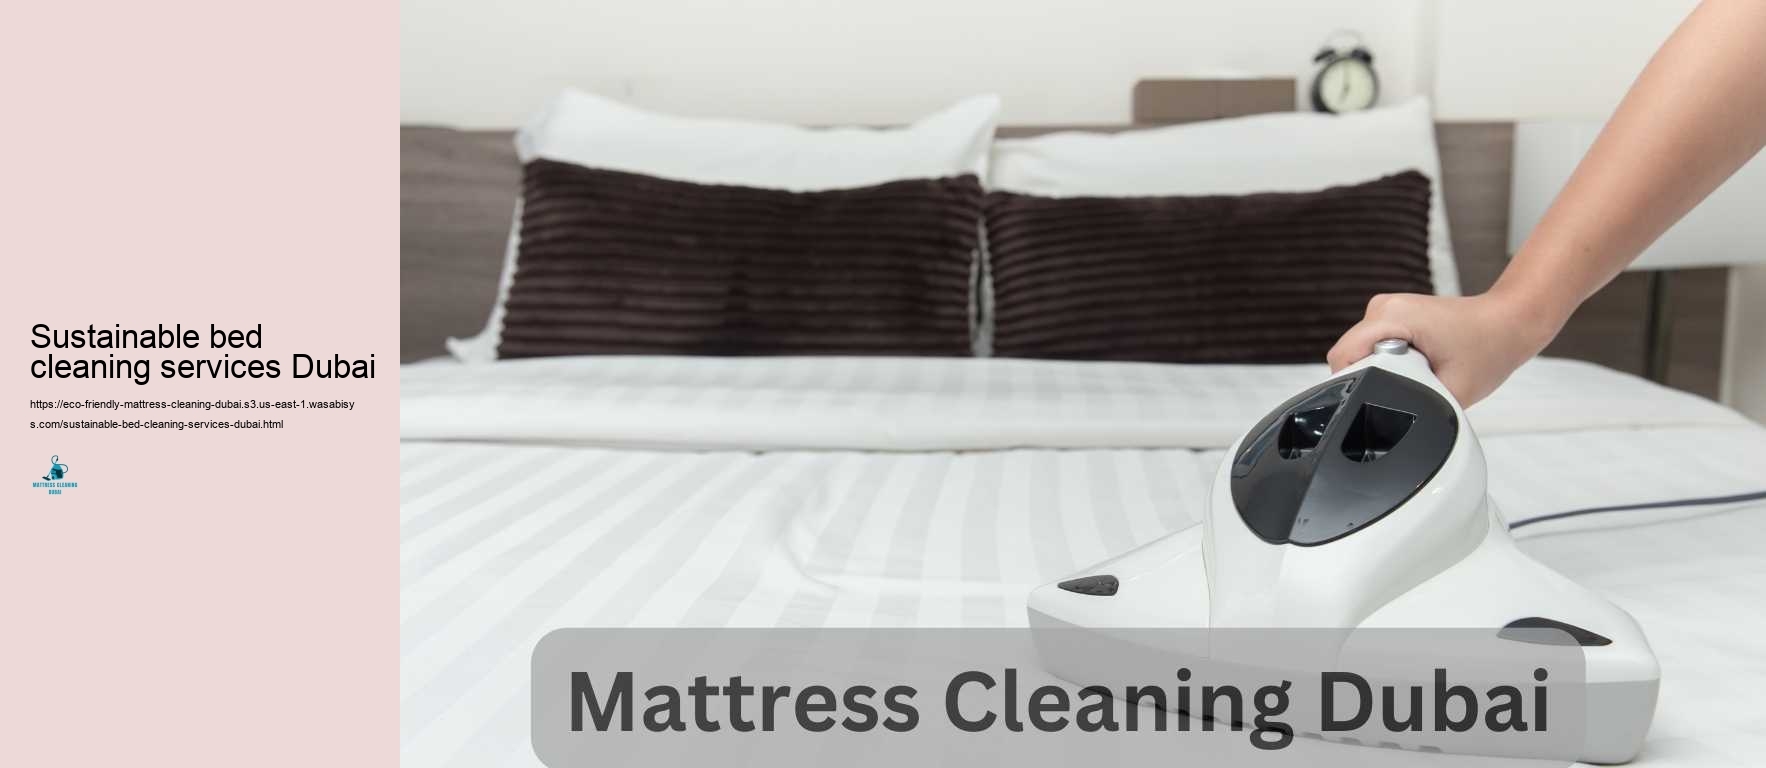 Sustainable bed cleaning services Dubai